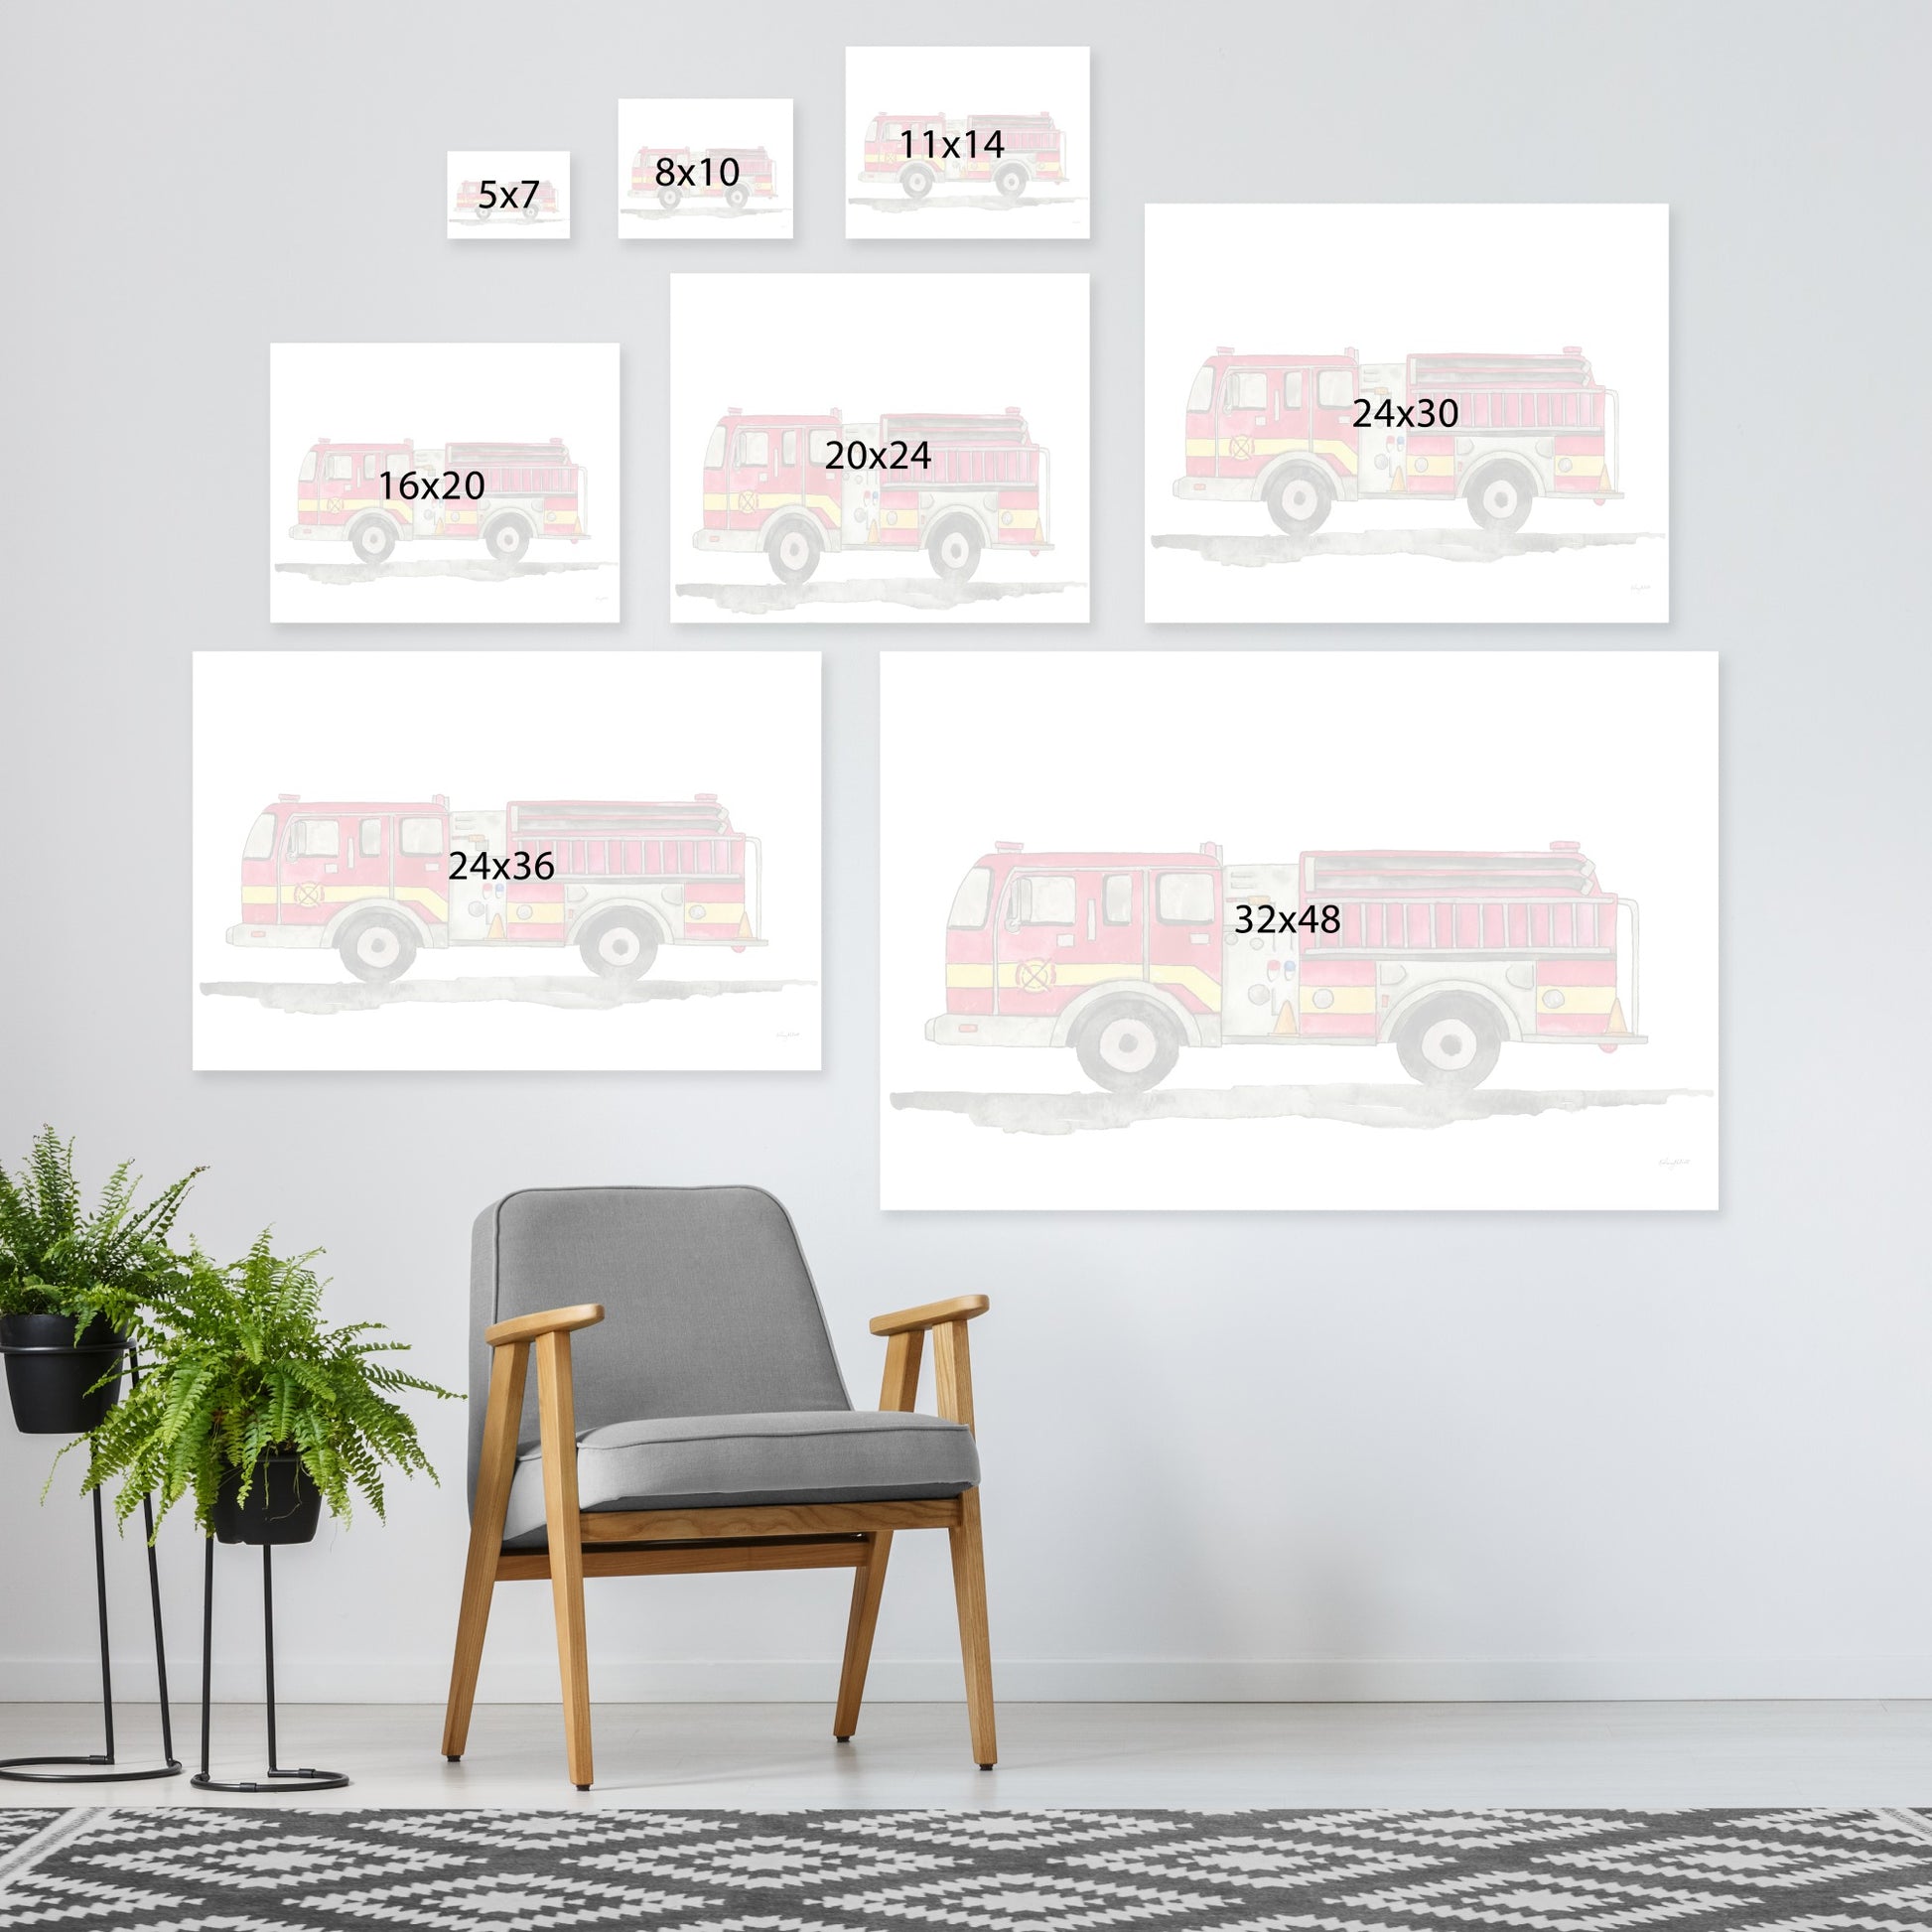 Vehicles Fire Truck by Kelsey Mcnatt - Wrapped Canvas - Wrapped Canvas - Americanflat